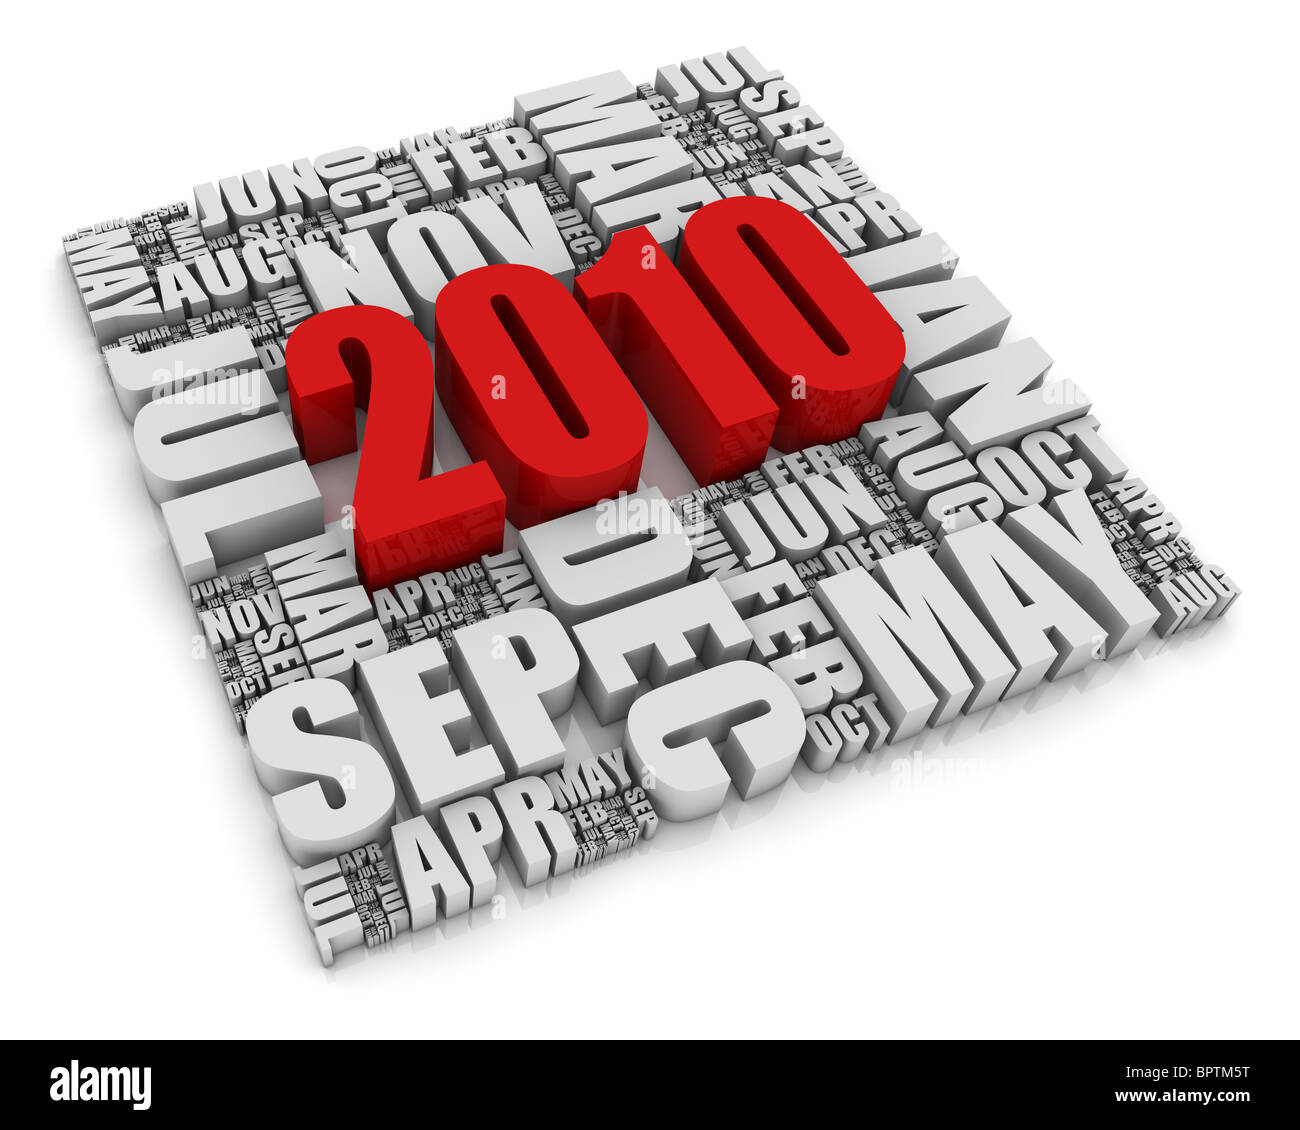 3D text representing the year 2010 and the twelve months. Part of a series of calendar concepts. Stock Photo